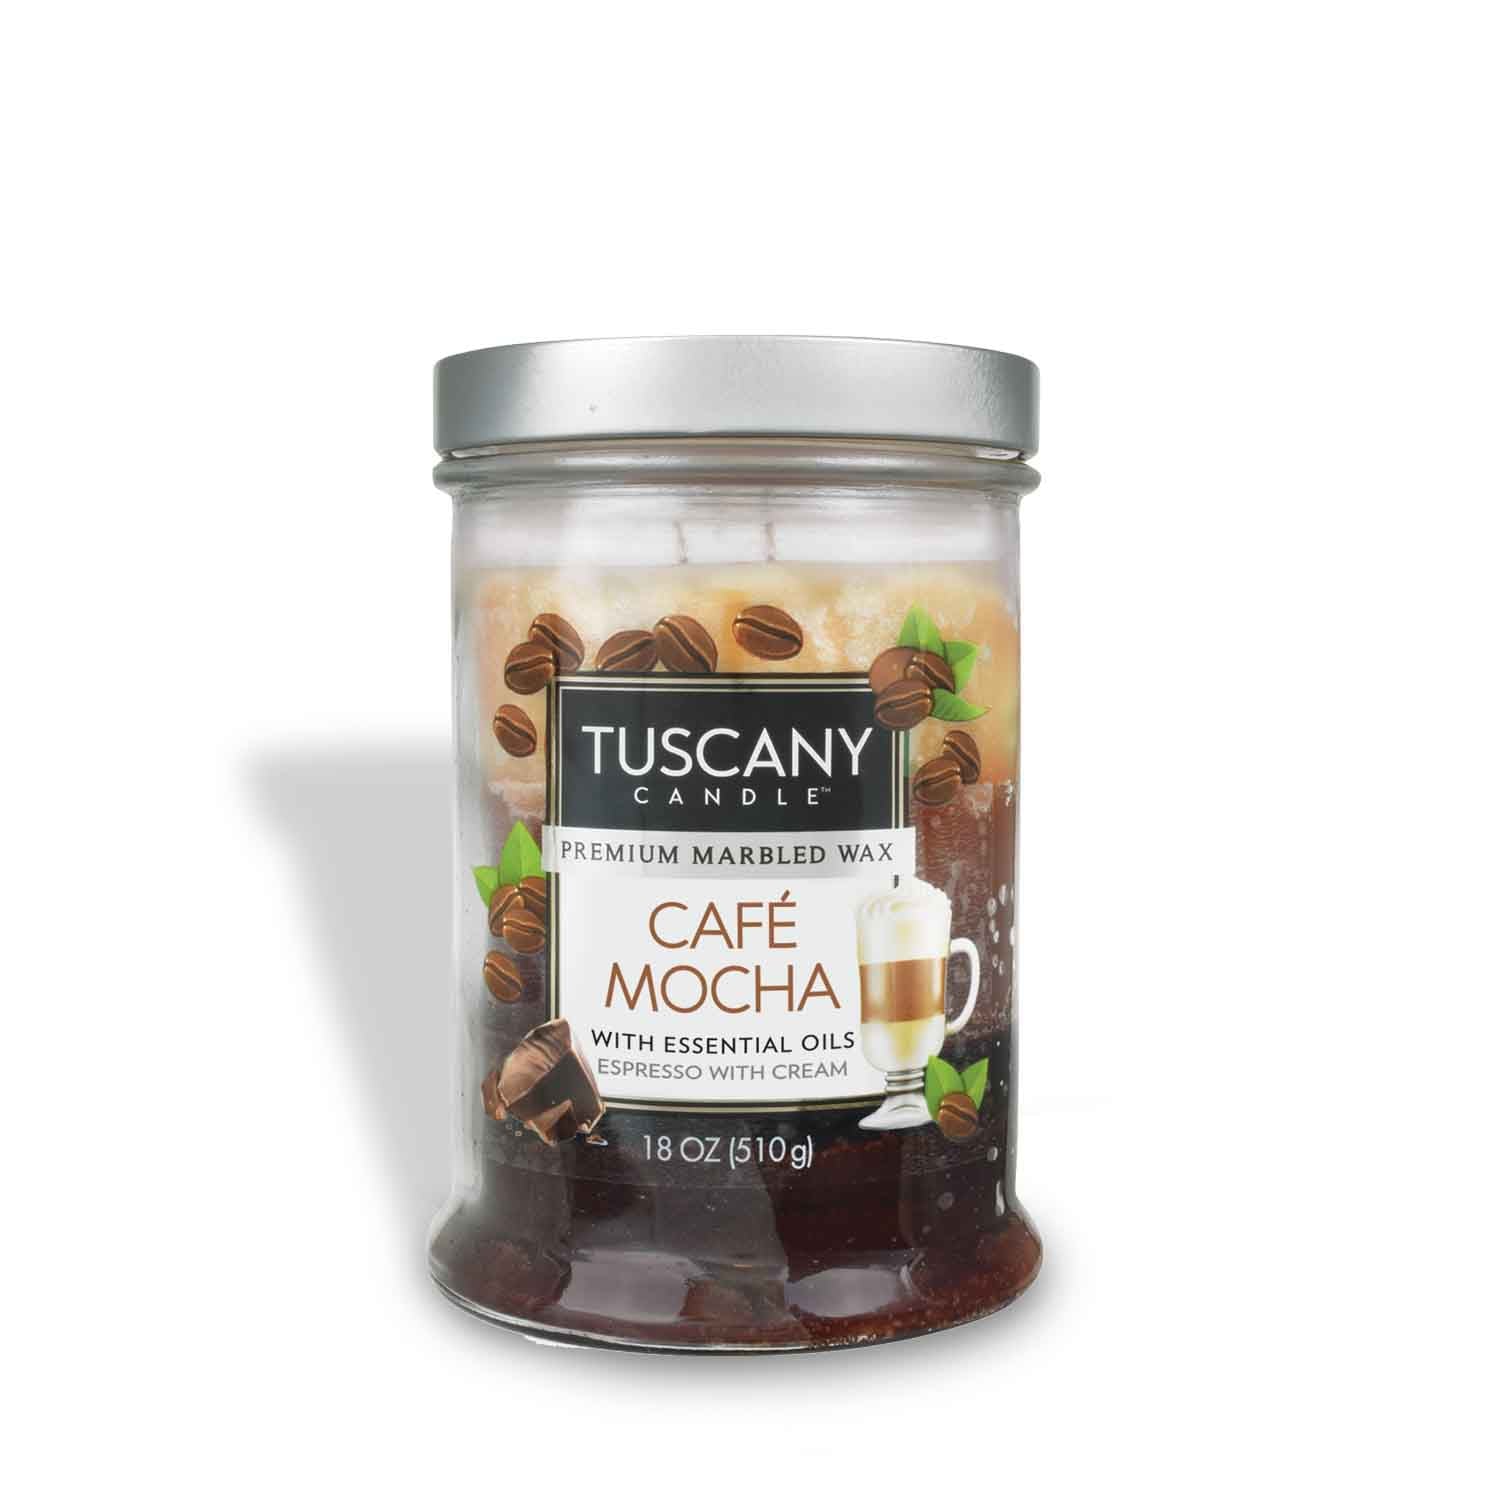 Indulge in the rich espresso aroma of our Tuscany Café Mocha Long-Lasting Scented Jar Candle (18 oz).